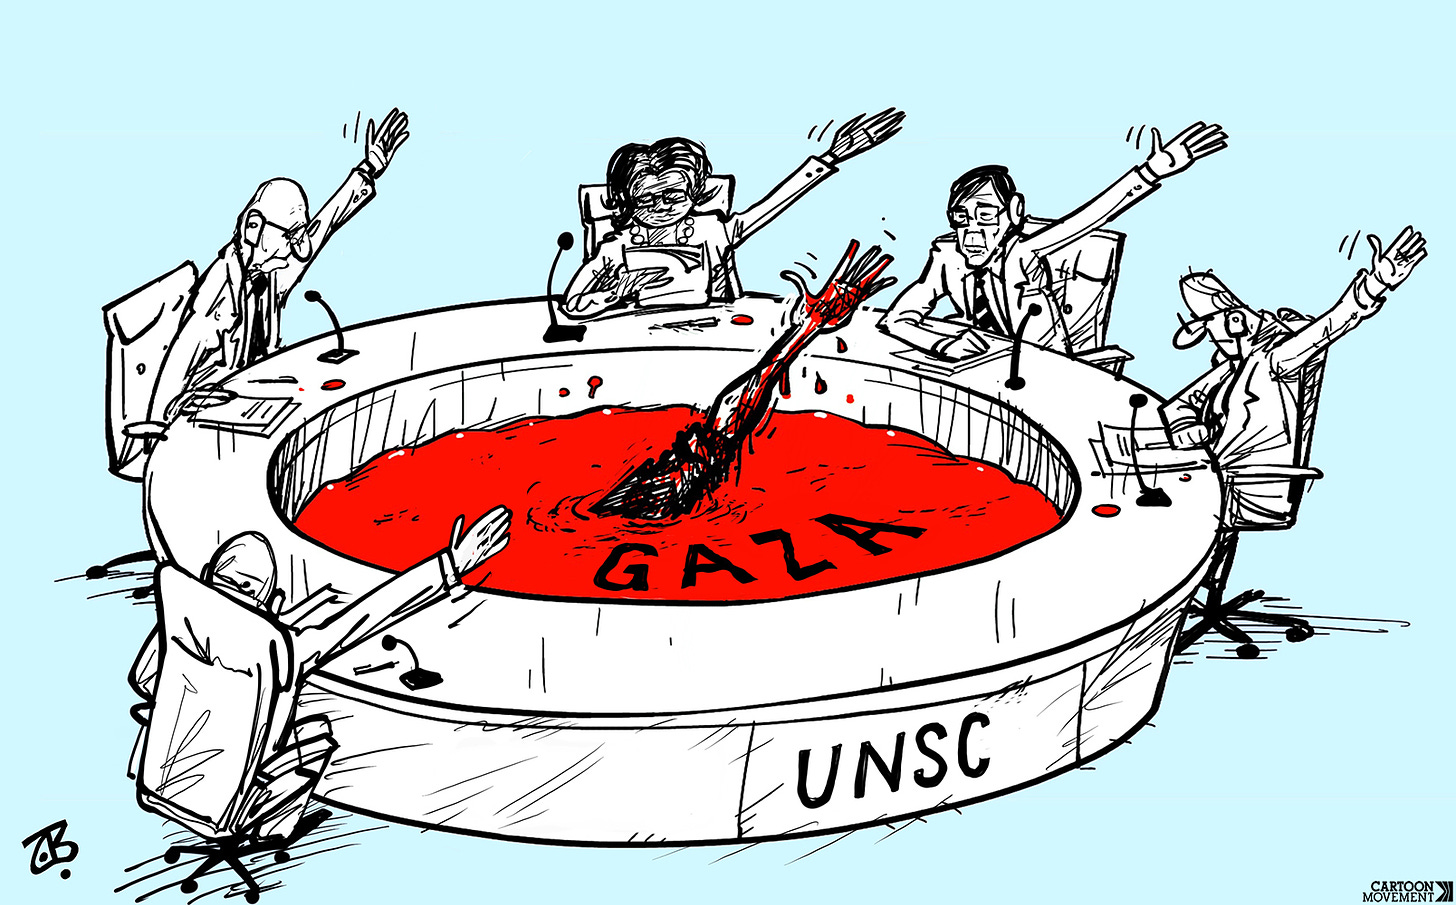 Cartoon showing the UN Security Council as a circular table with a hole in the middle. Around the table people are raising their hands. The hole in the table is filled with blood labeled 'Gaza'; from it emerges a hand that is also raised, in desperation.